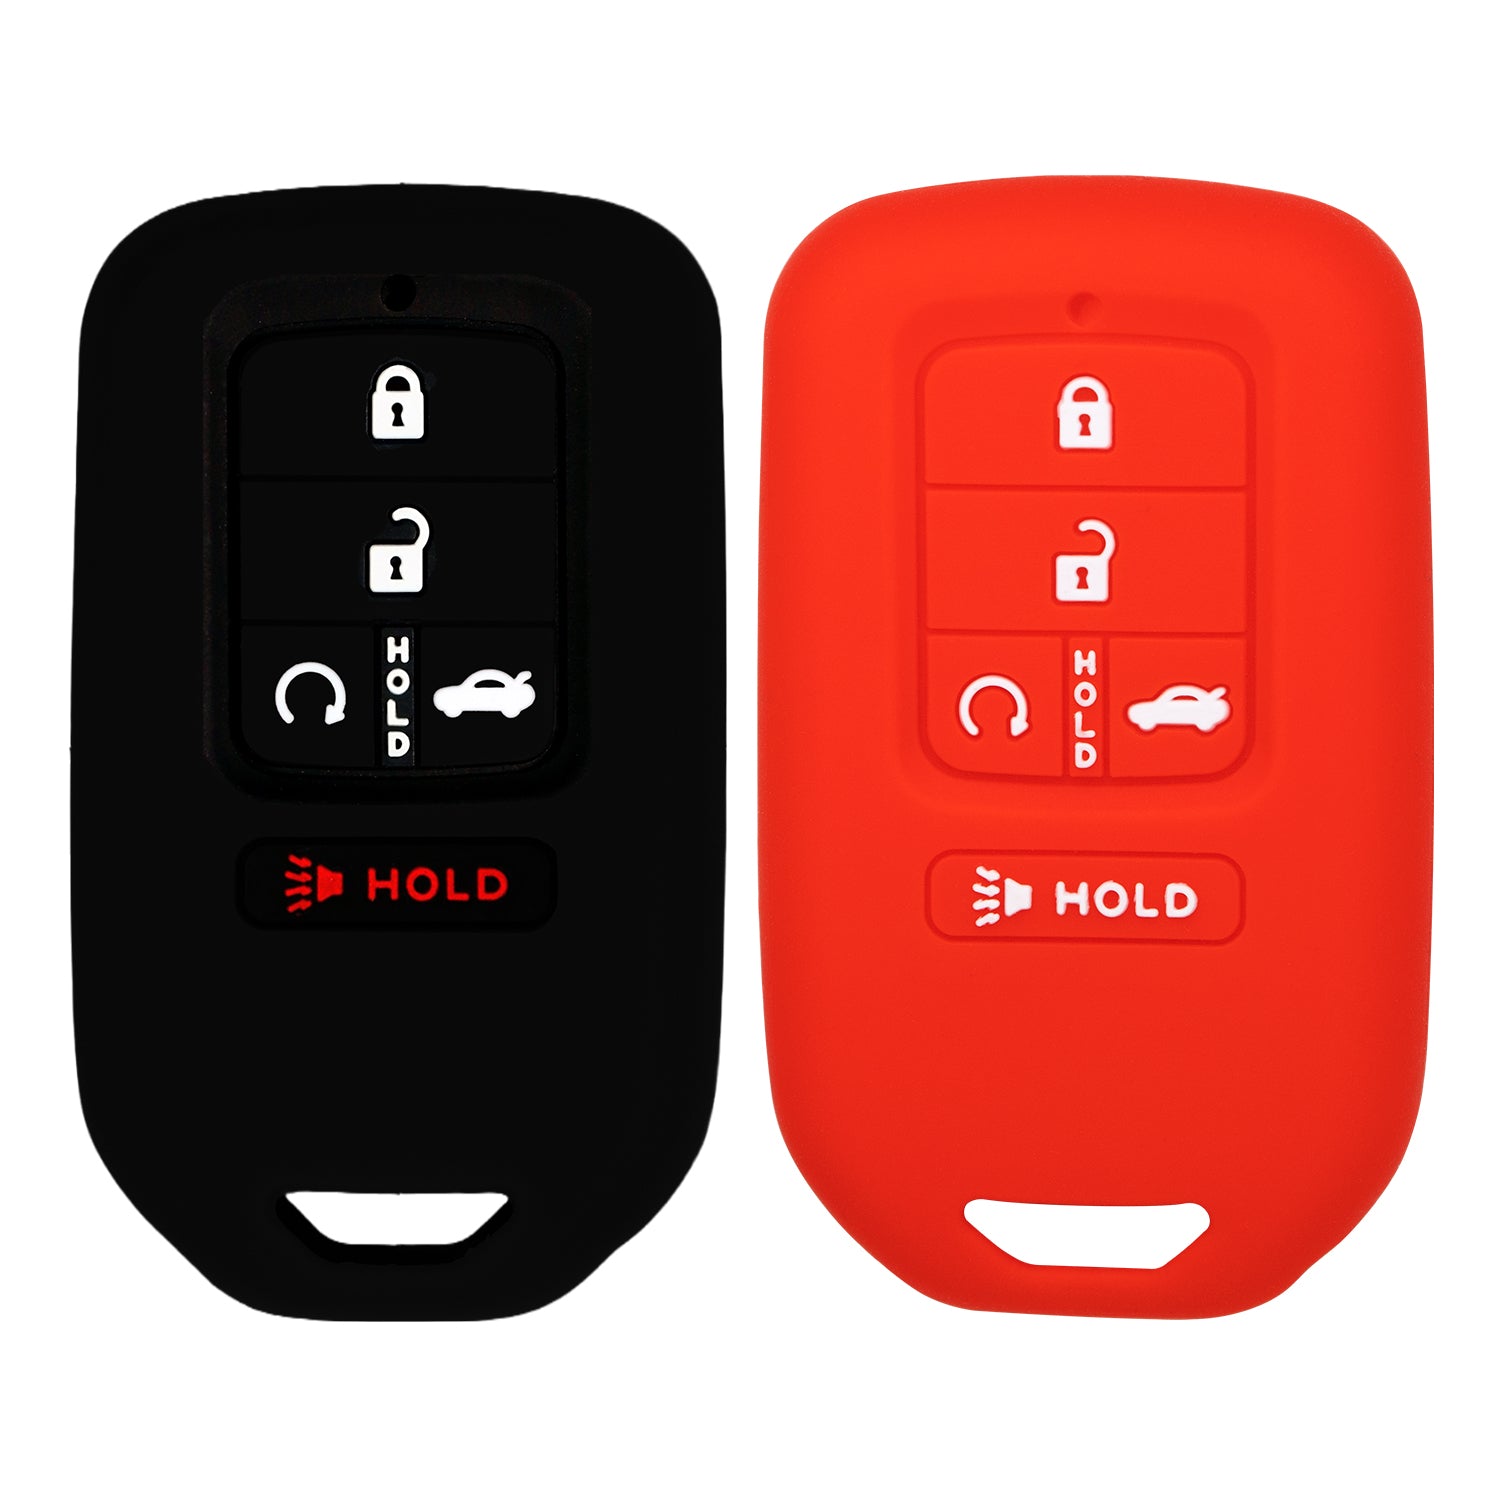 Silicone Case for Keyless entry Smart key fob for Honda Accord Civic CR-V CRV Pilot Passport Insight EX EX-L Touring | Car Accessory | Key Protection Case 2 Pcs (Black & Red)